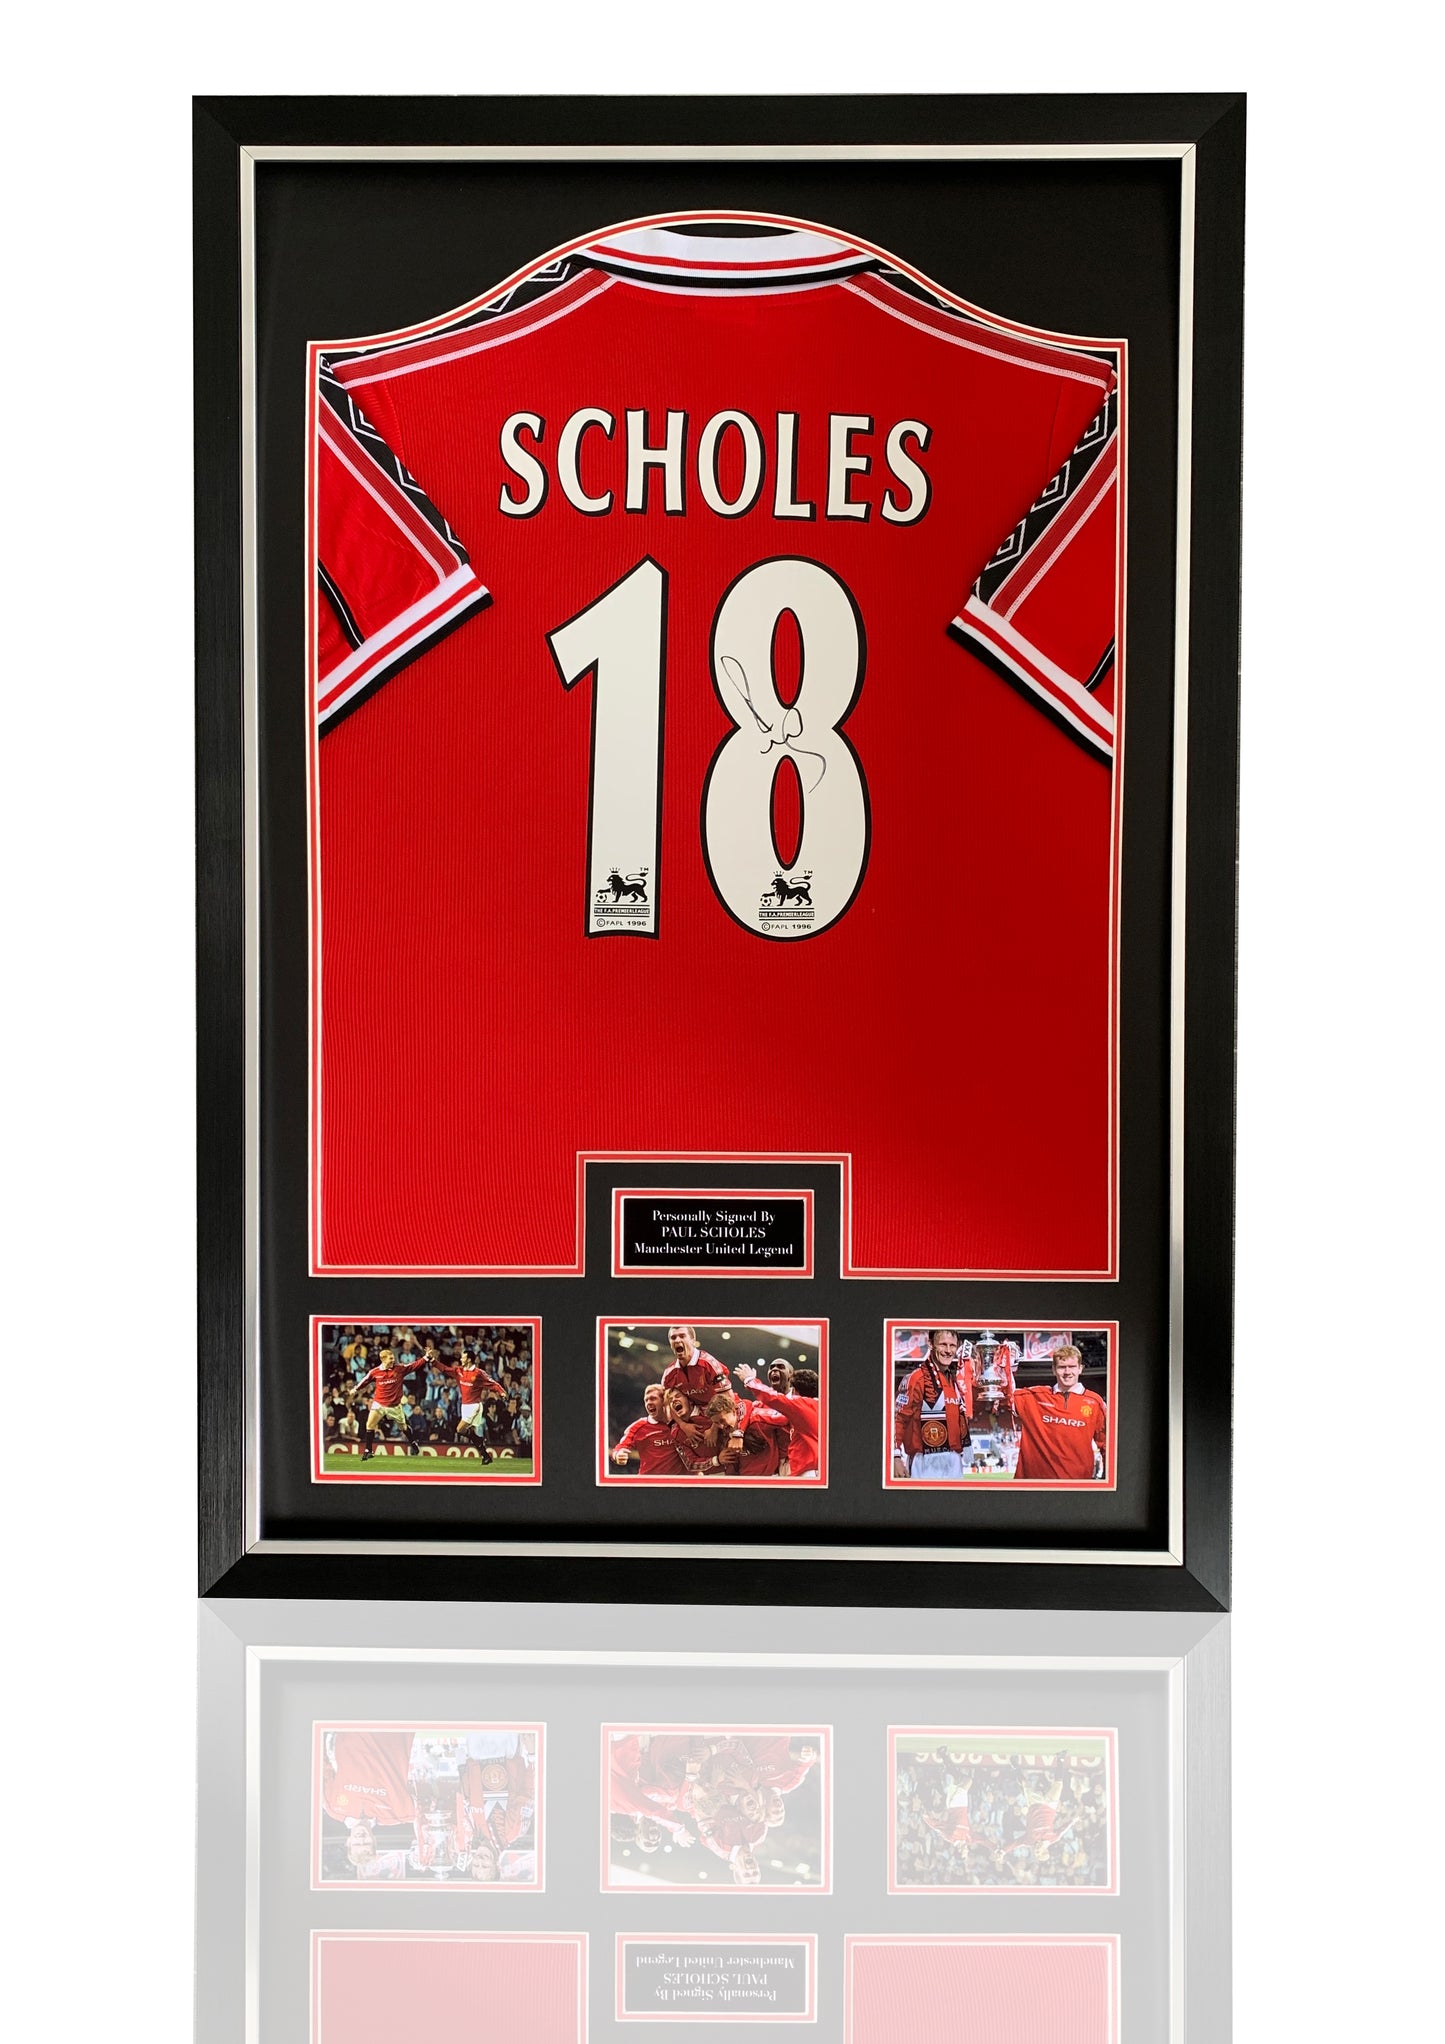 Paul Scholes Signed 1999 Manchester United Shirt deluxe frame